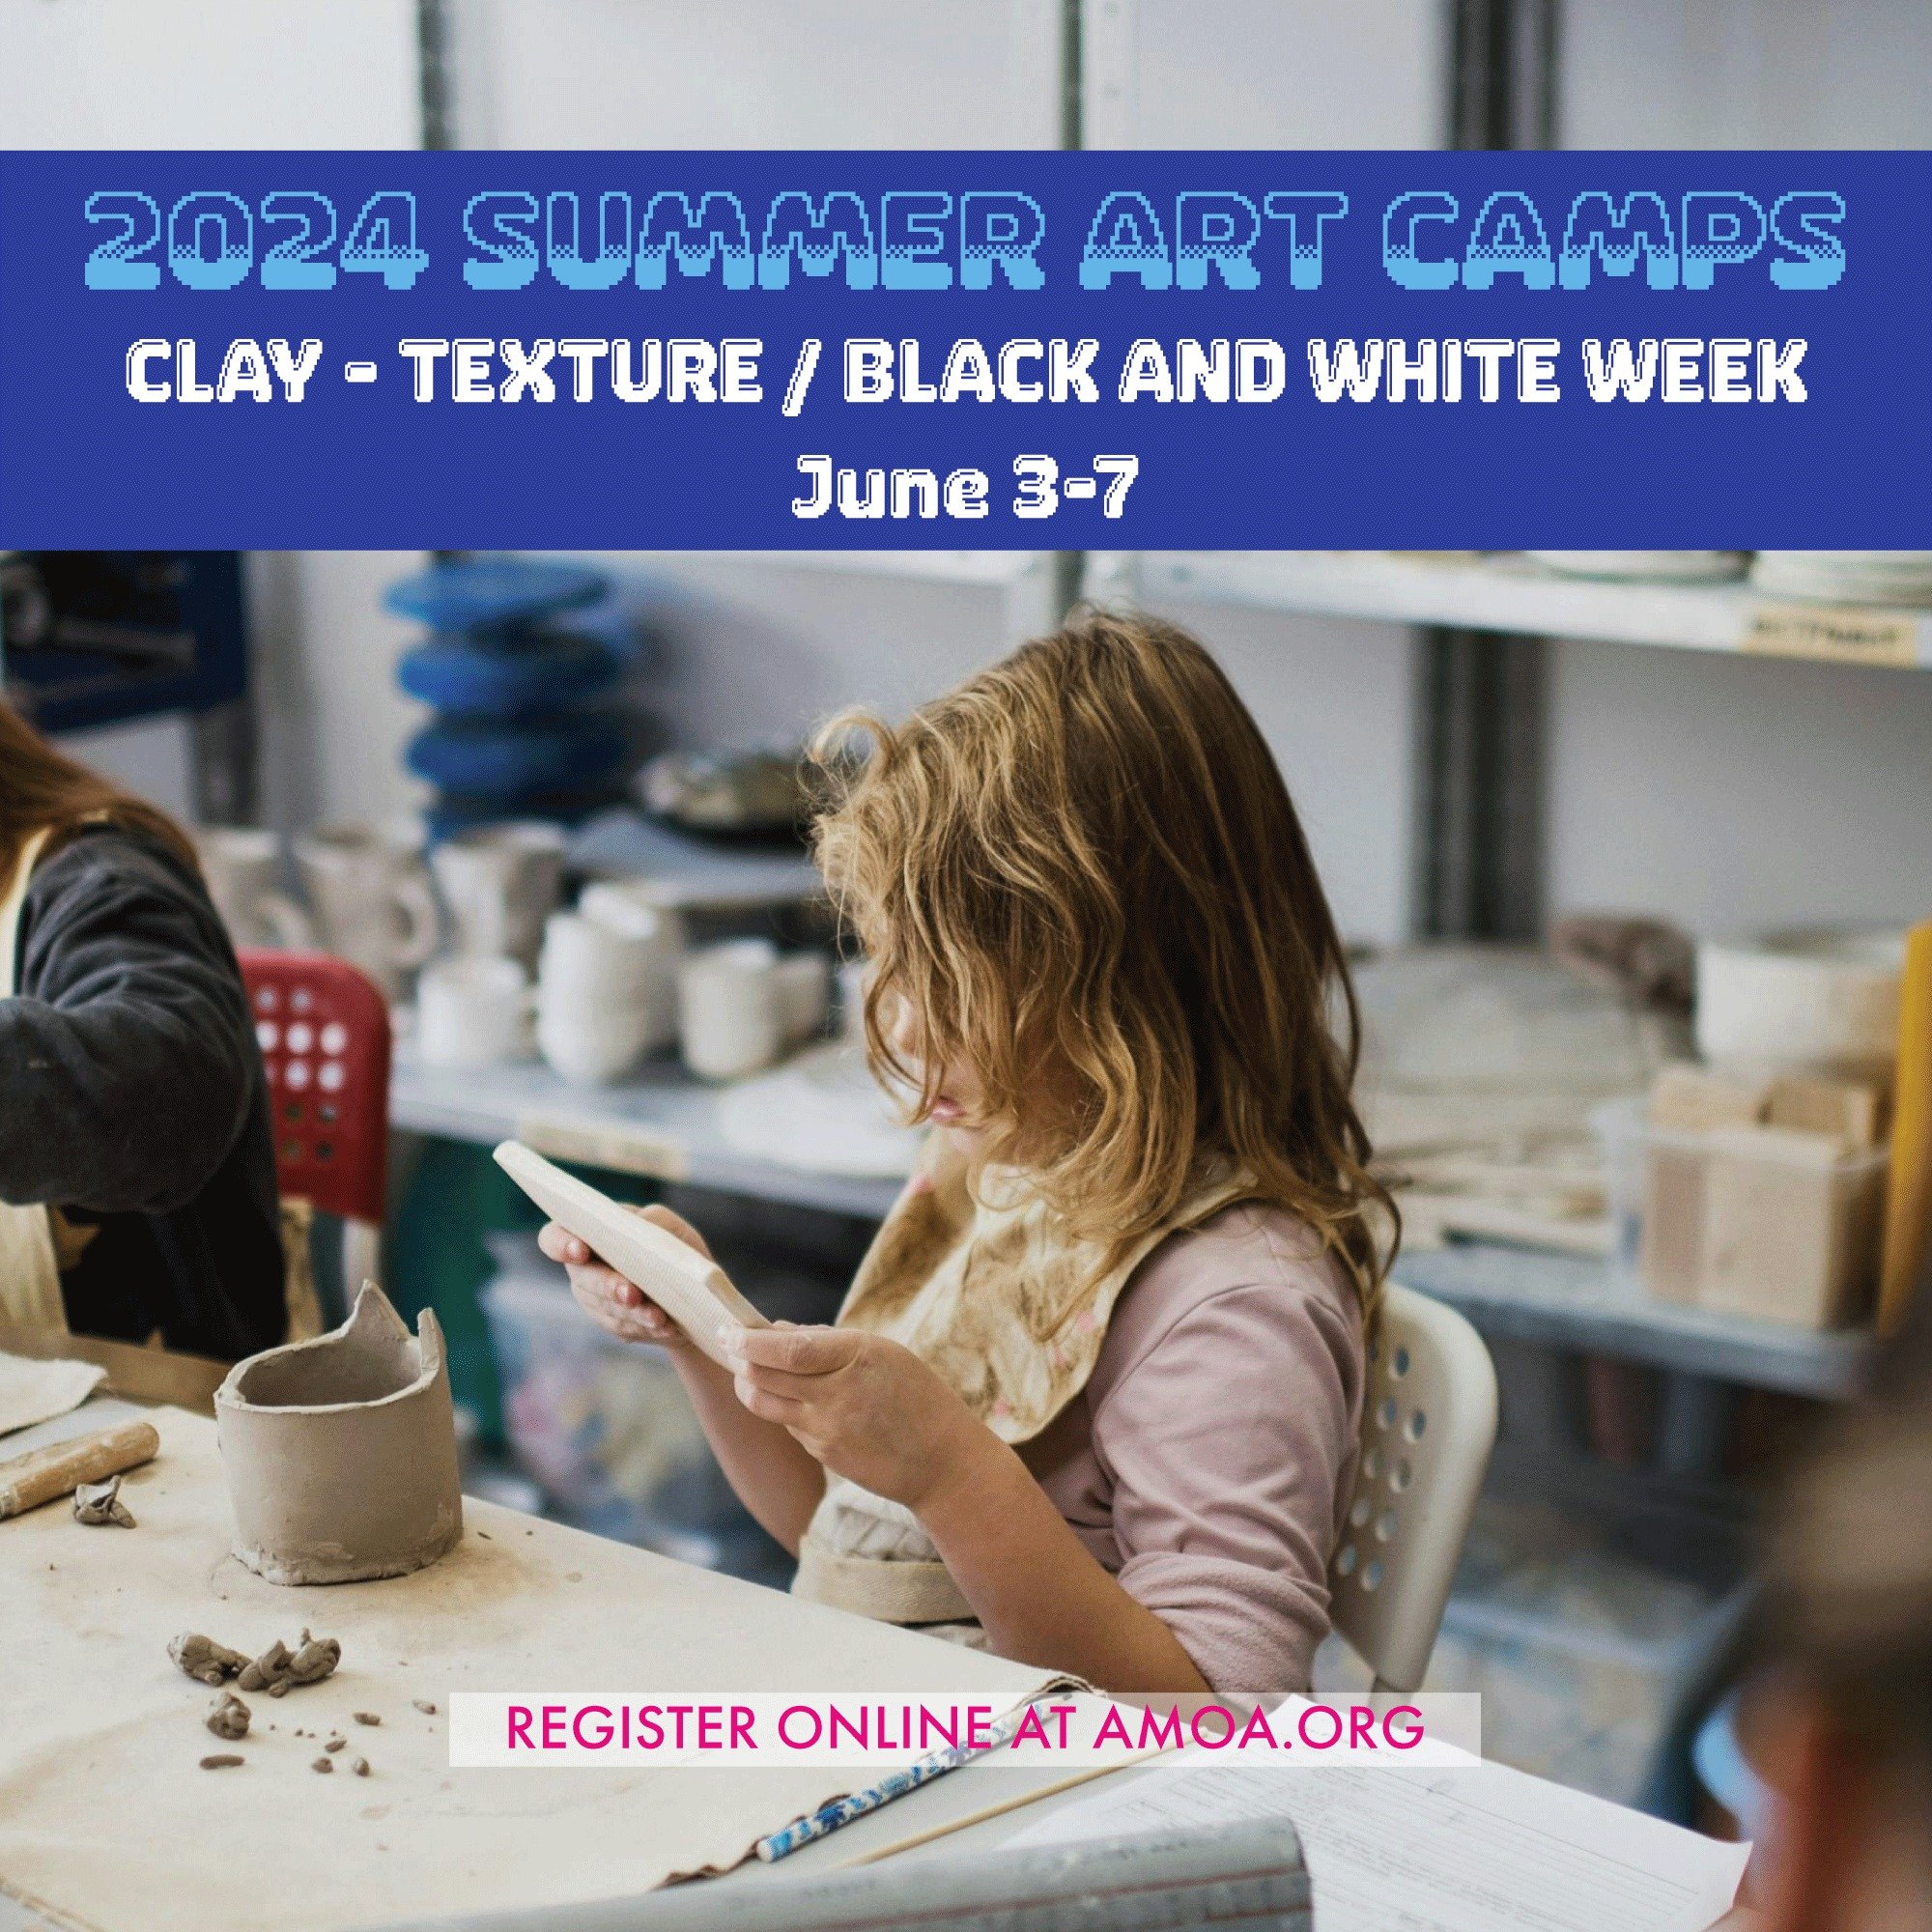 Clay - Texture / Black and White week is a great introductory camp for kids to learn the basics of handbuilding with clay. Students will explore techniques like stamping and carving to create textured surfaces for their sculptural vessels in clay and